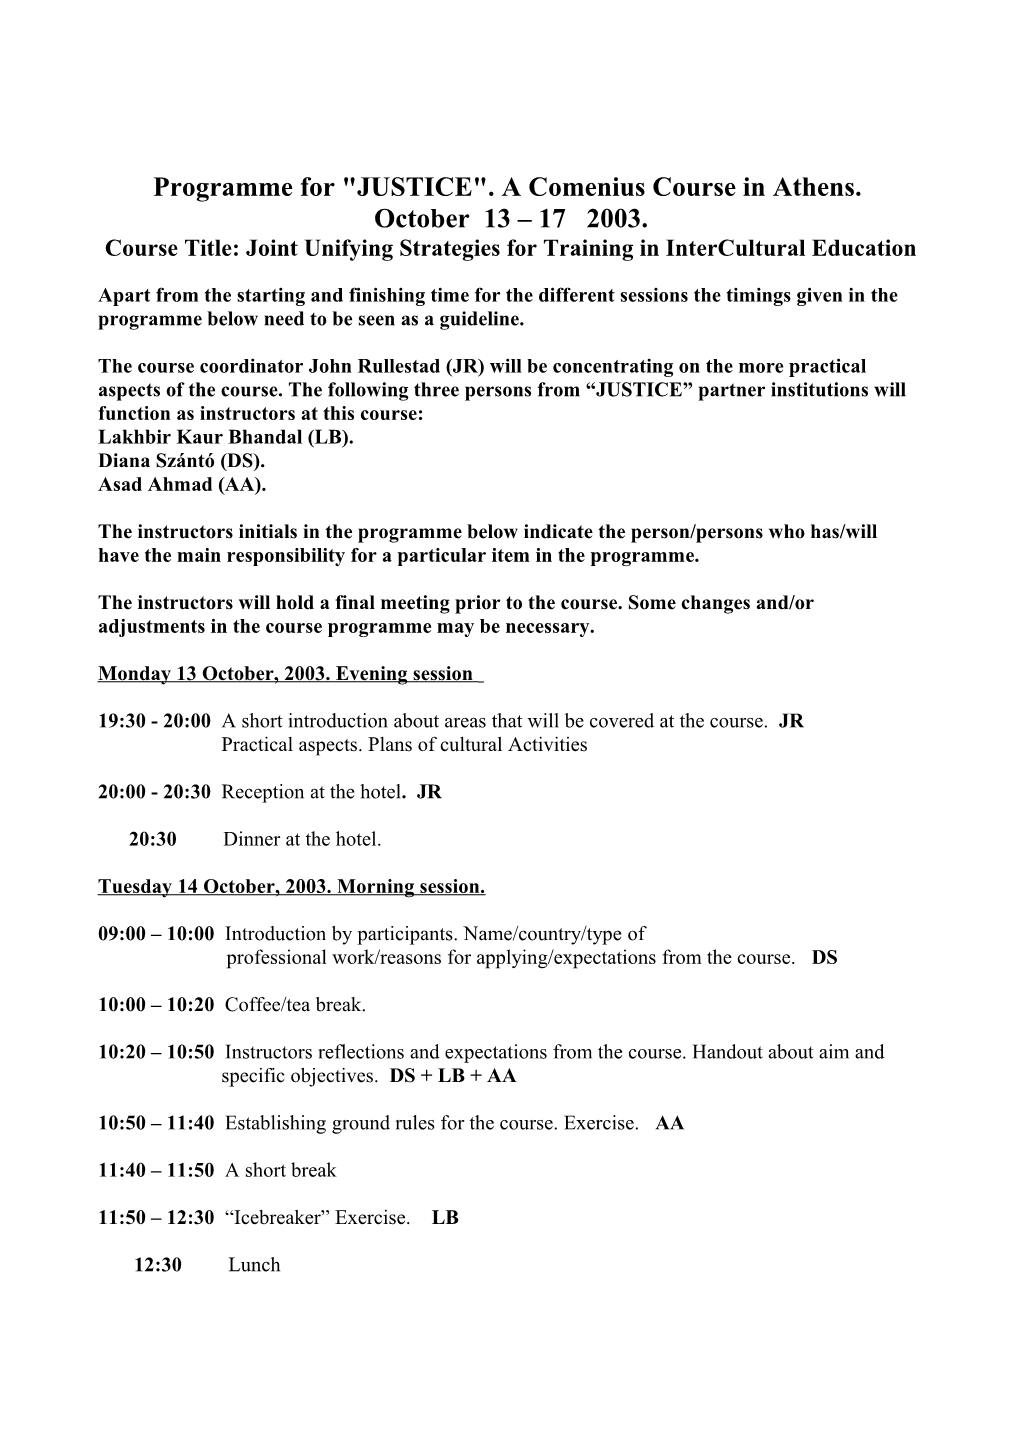 Programme for JUSTICE . a Comenius Course in Athens